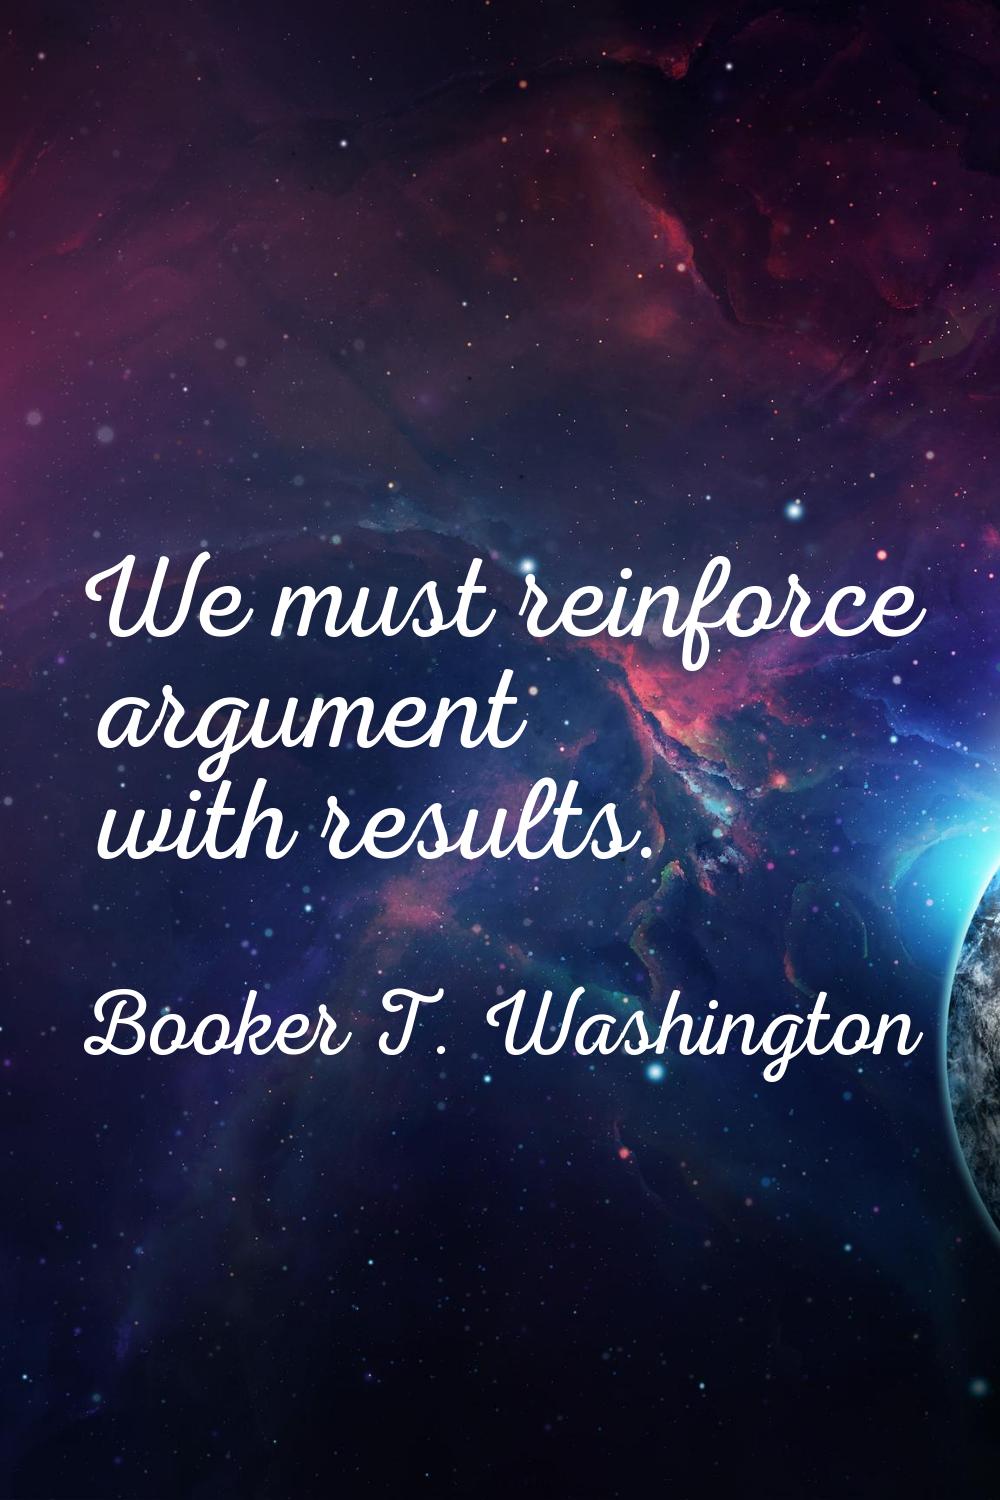 We must reinforce argument with results.